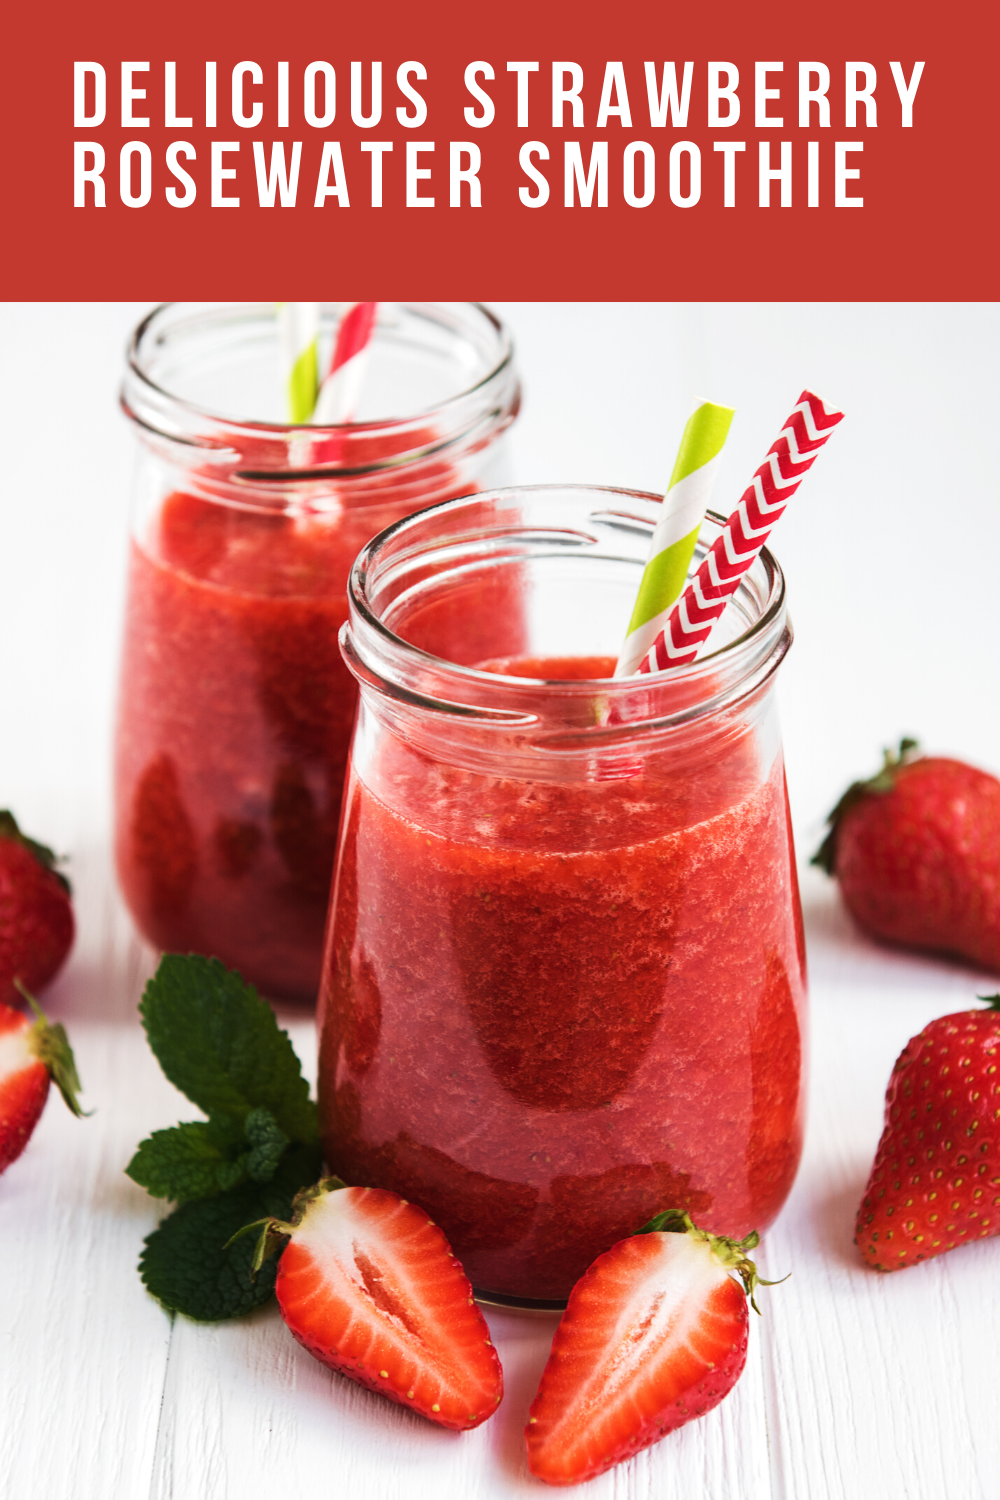 Delicious Strawberry Rosewater Smoothie